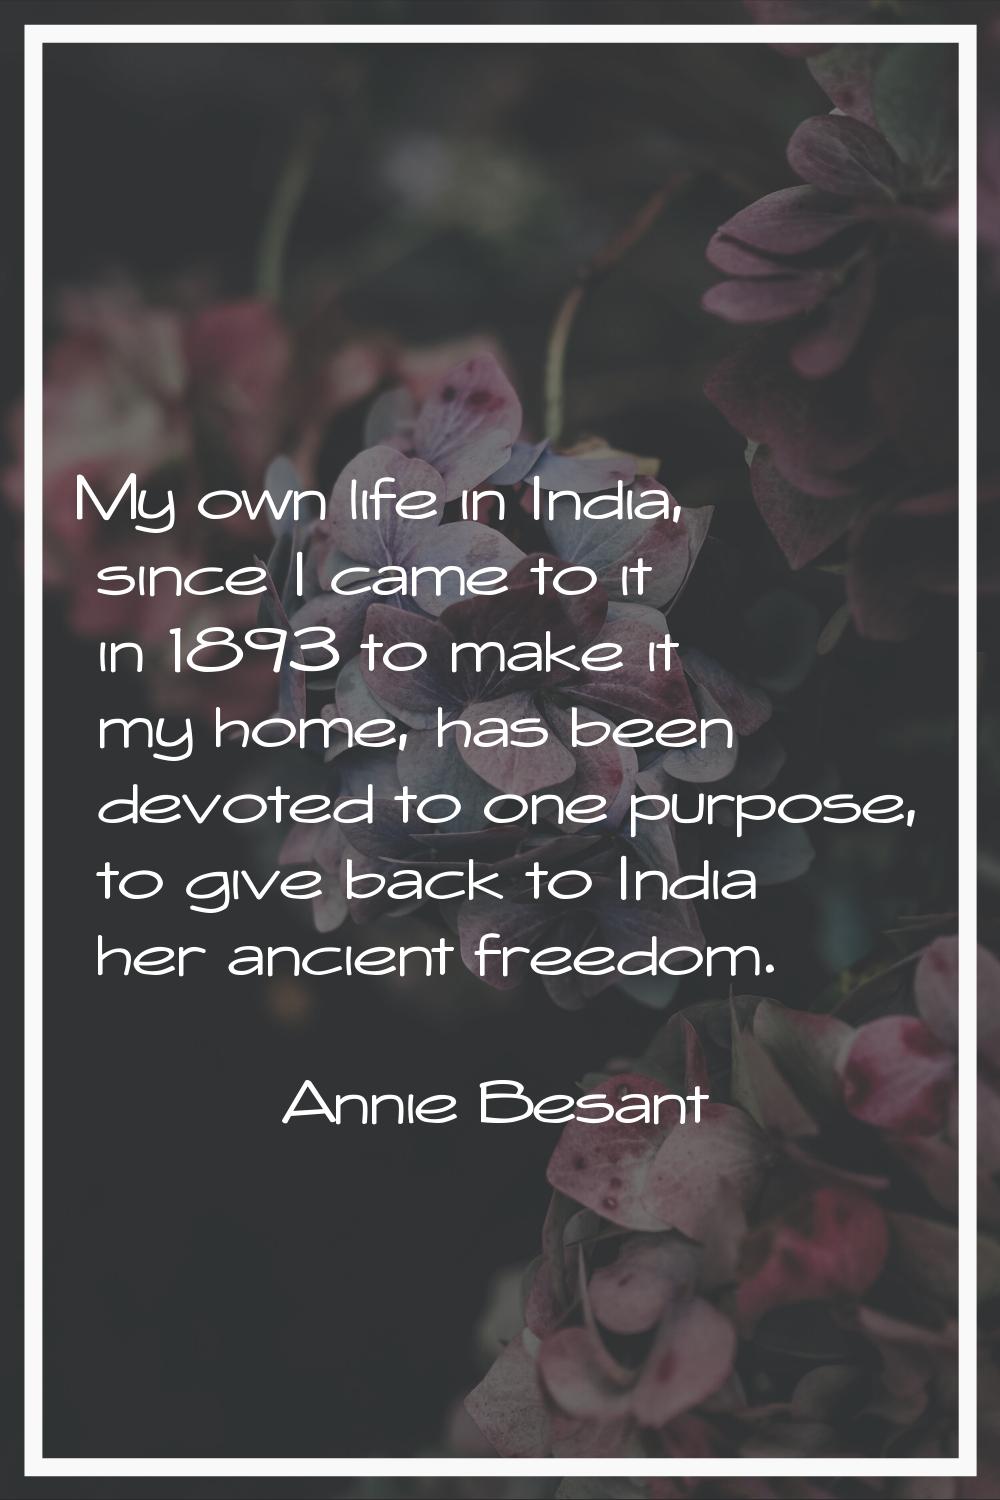 My own life in India, since I came to it in 1893 to make it my home, has been devoted to one purpos